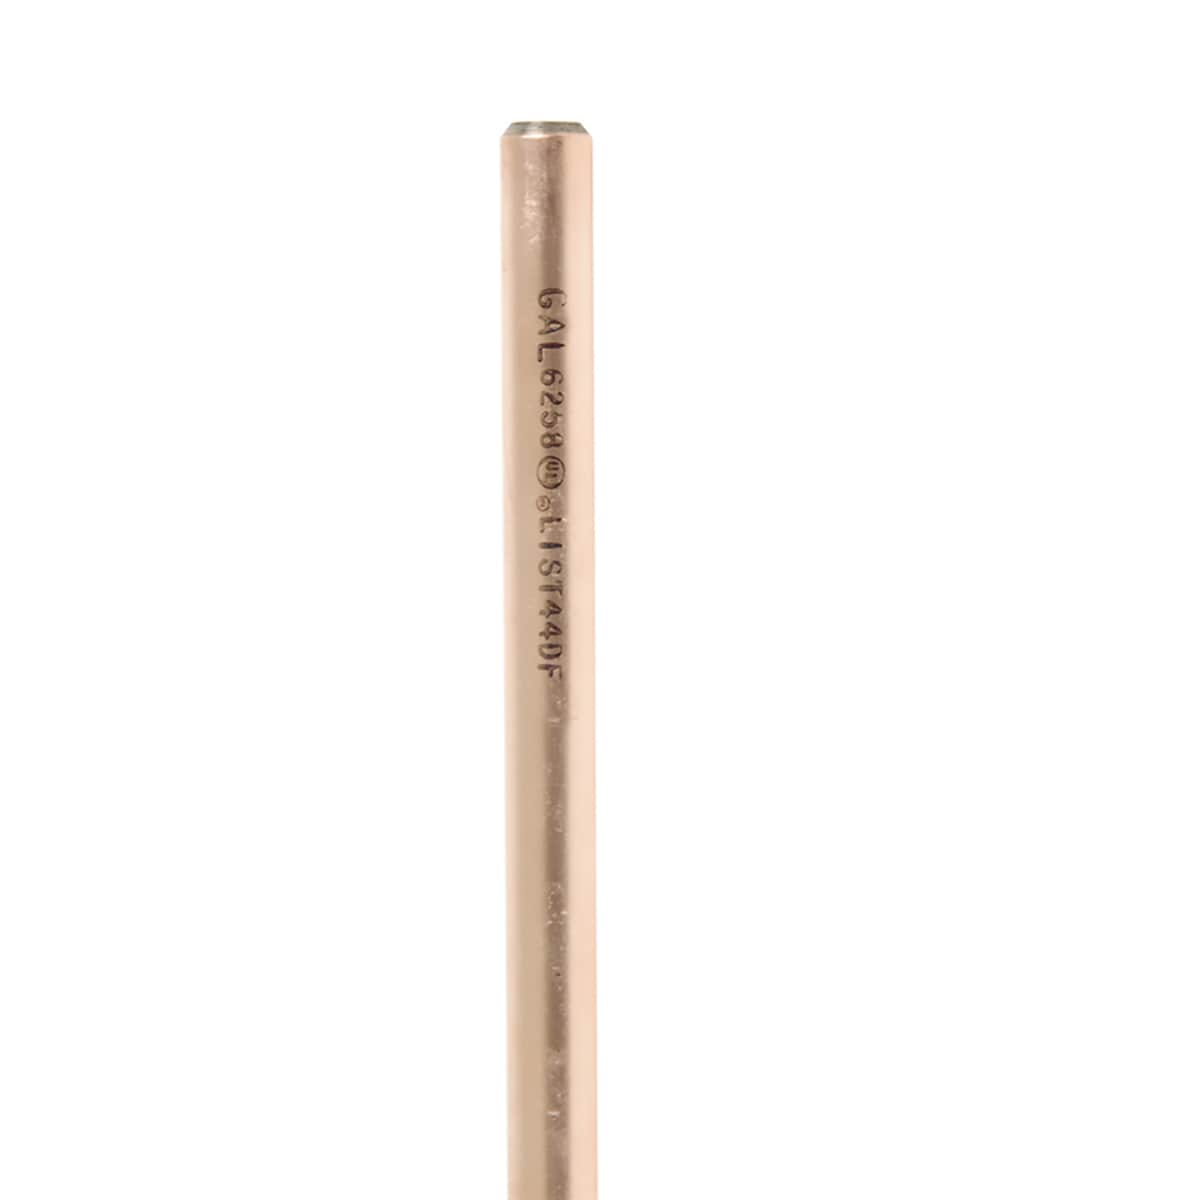 Galvan Grounding Rods, 0.625-in Diameter, 96-in Length, UL Listed, Meets  National Electric Code Requirements in the Grounding Bars department at